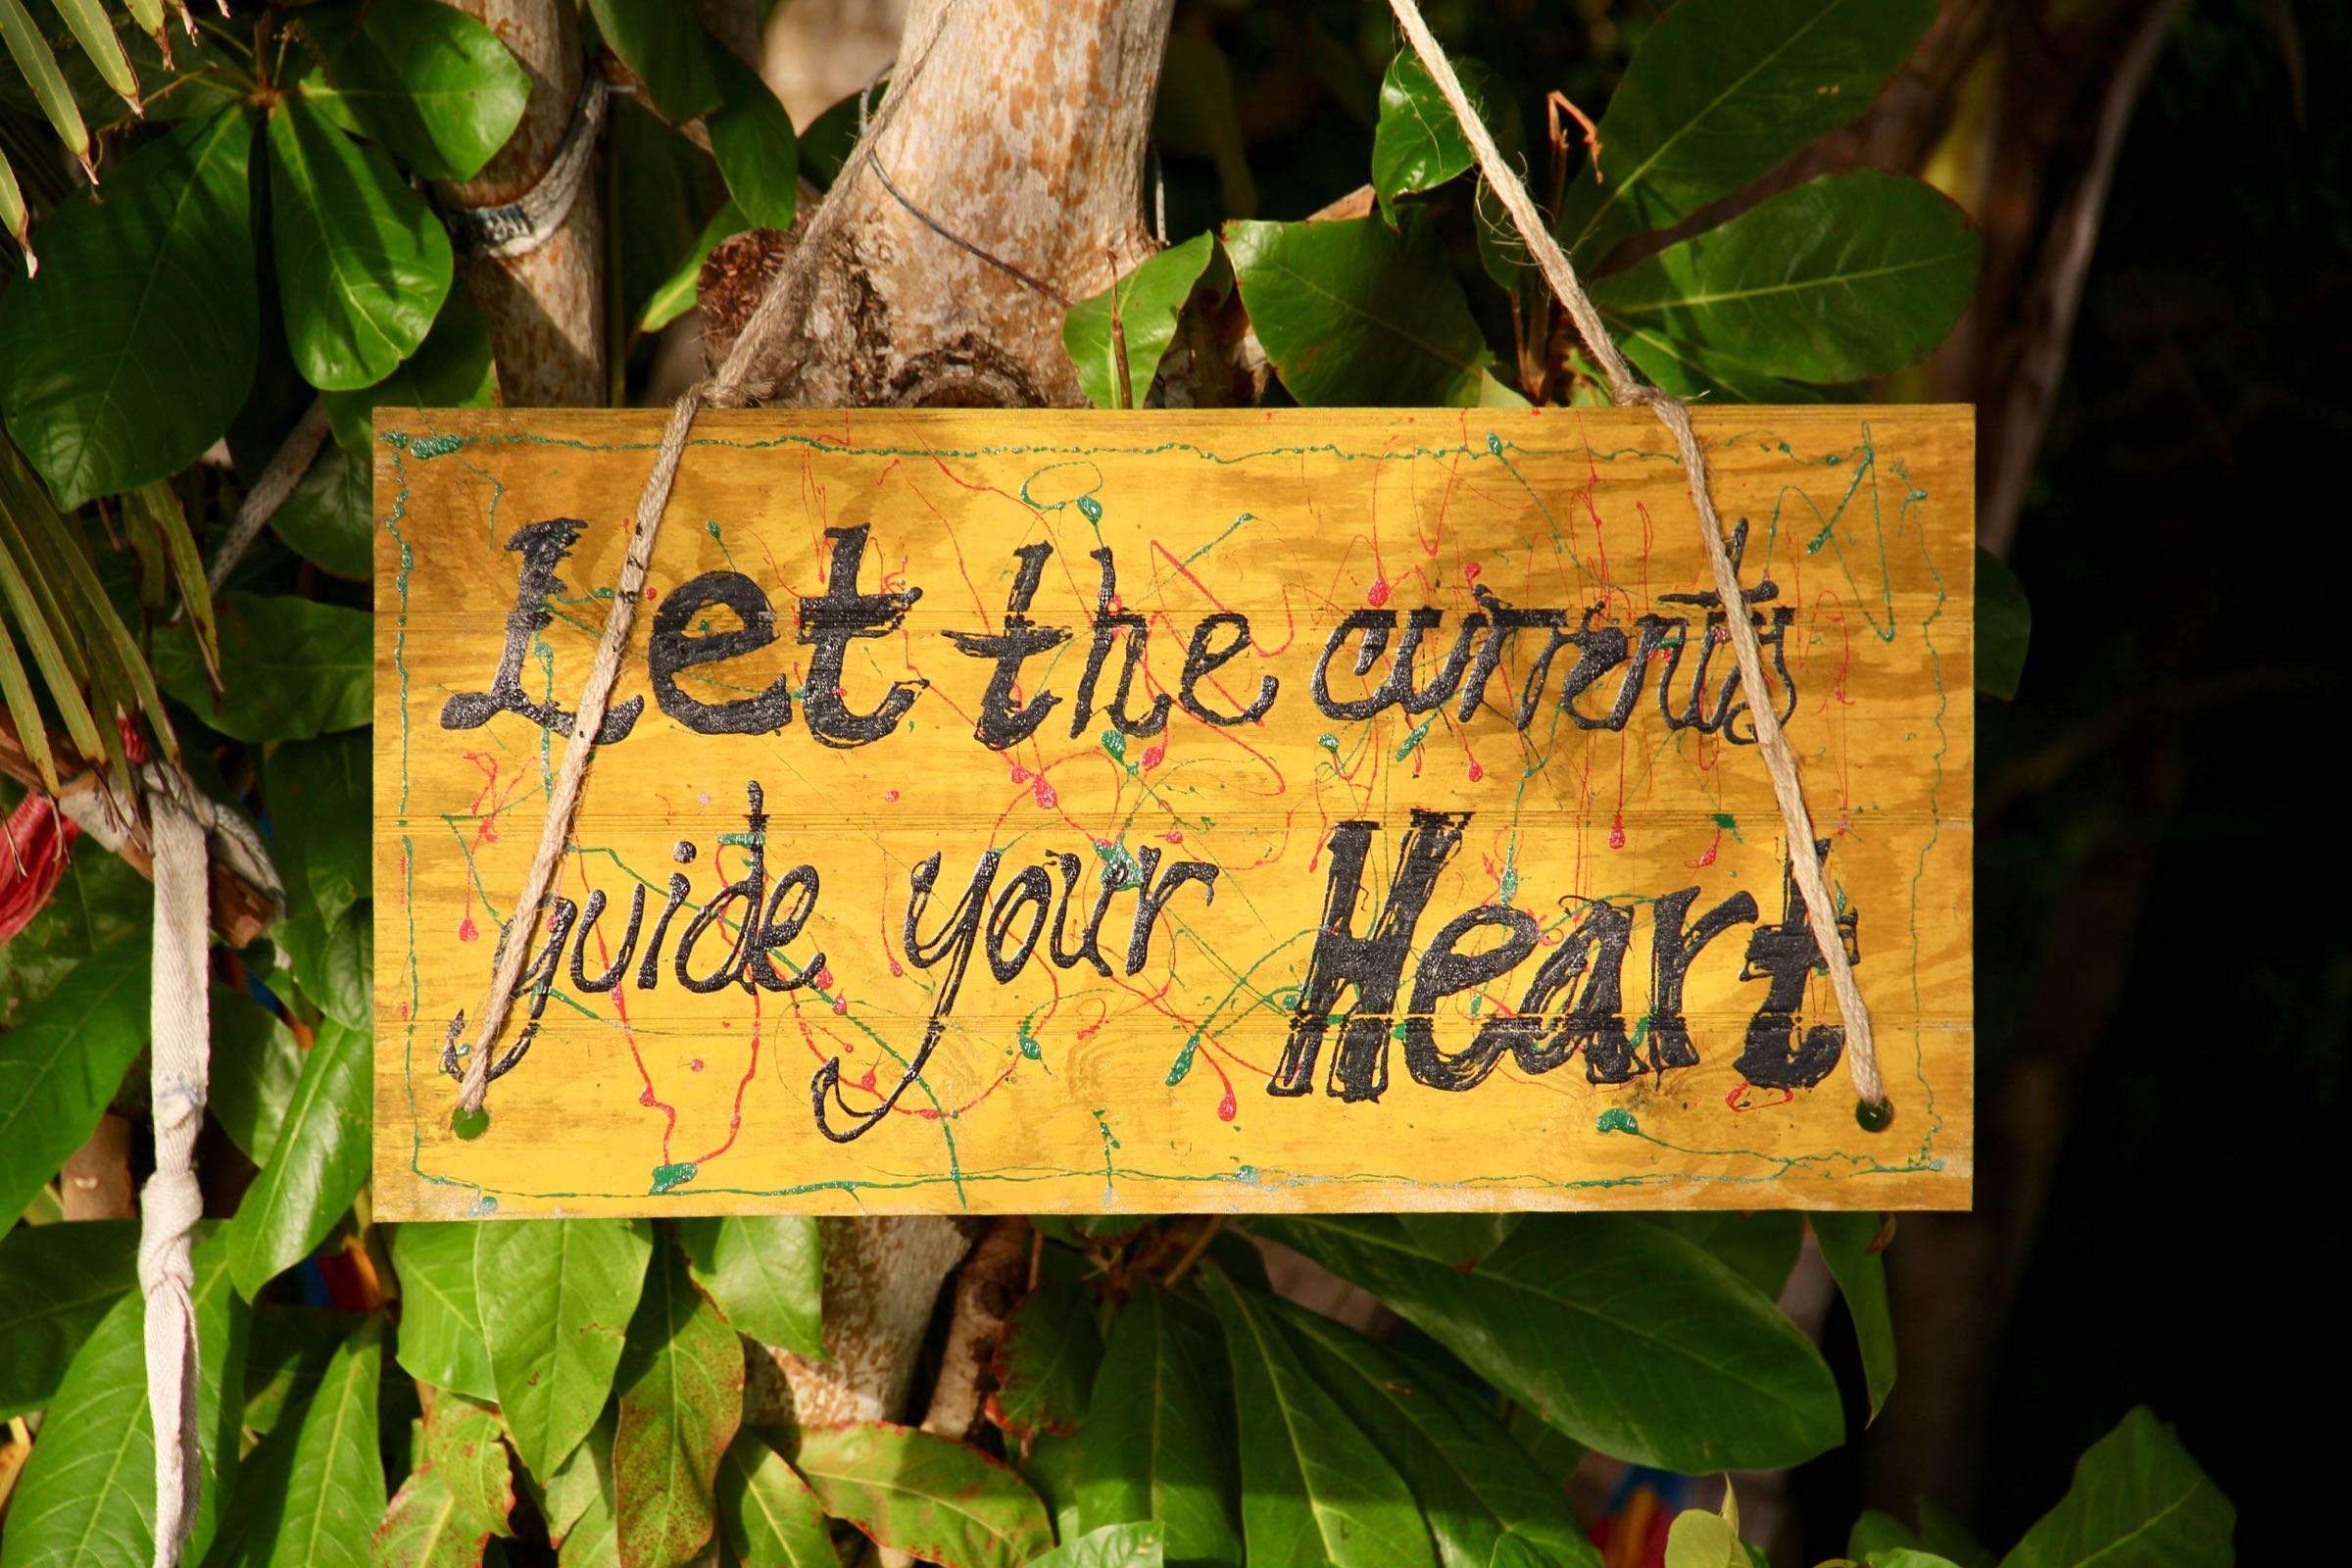 „Let the currents guide your Heart“, South West Bay, Providencia, Kolumbien